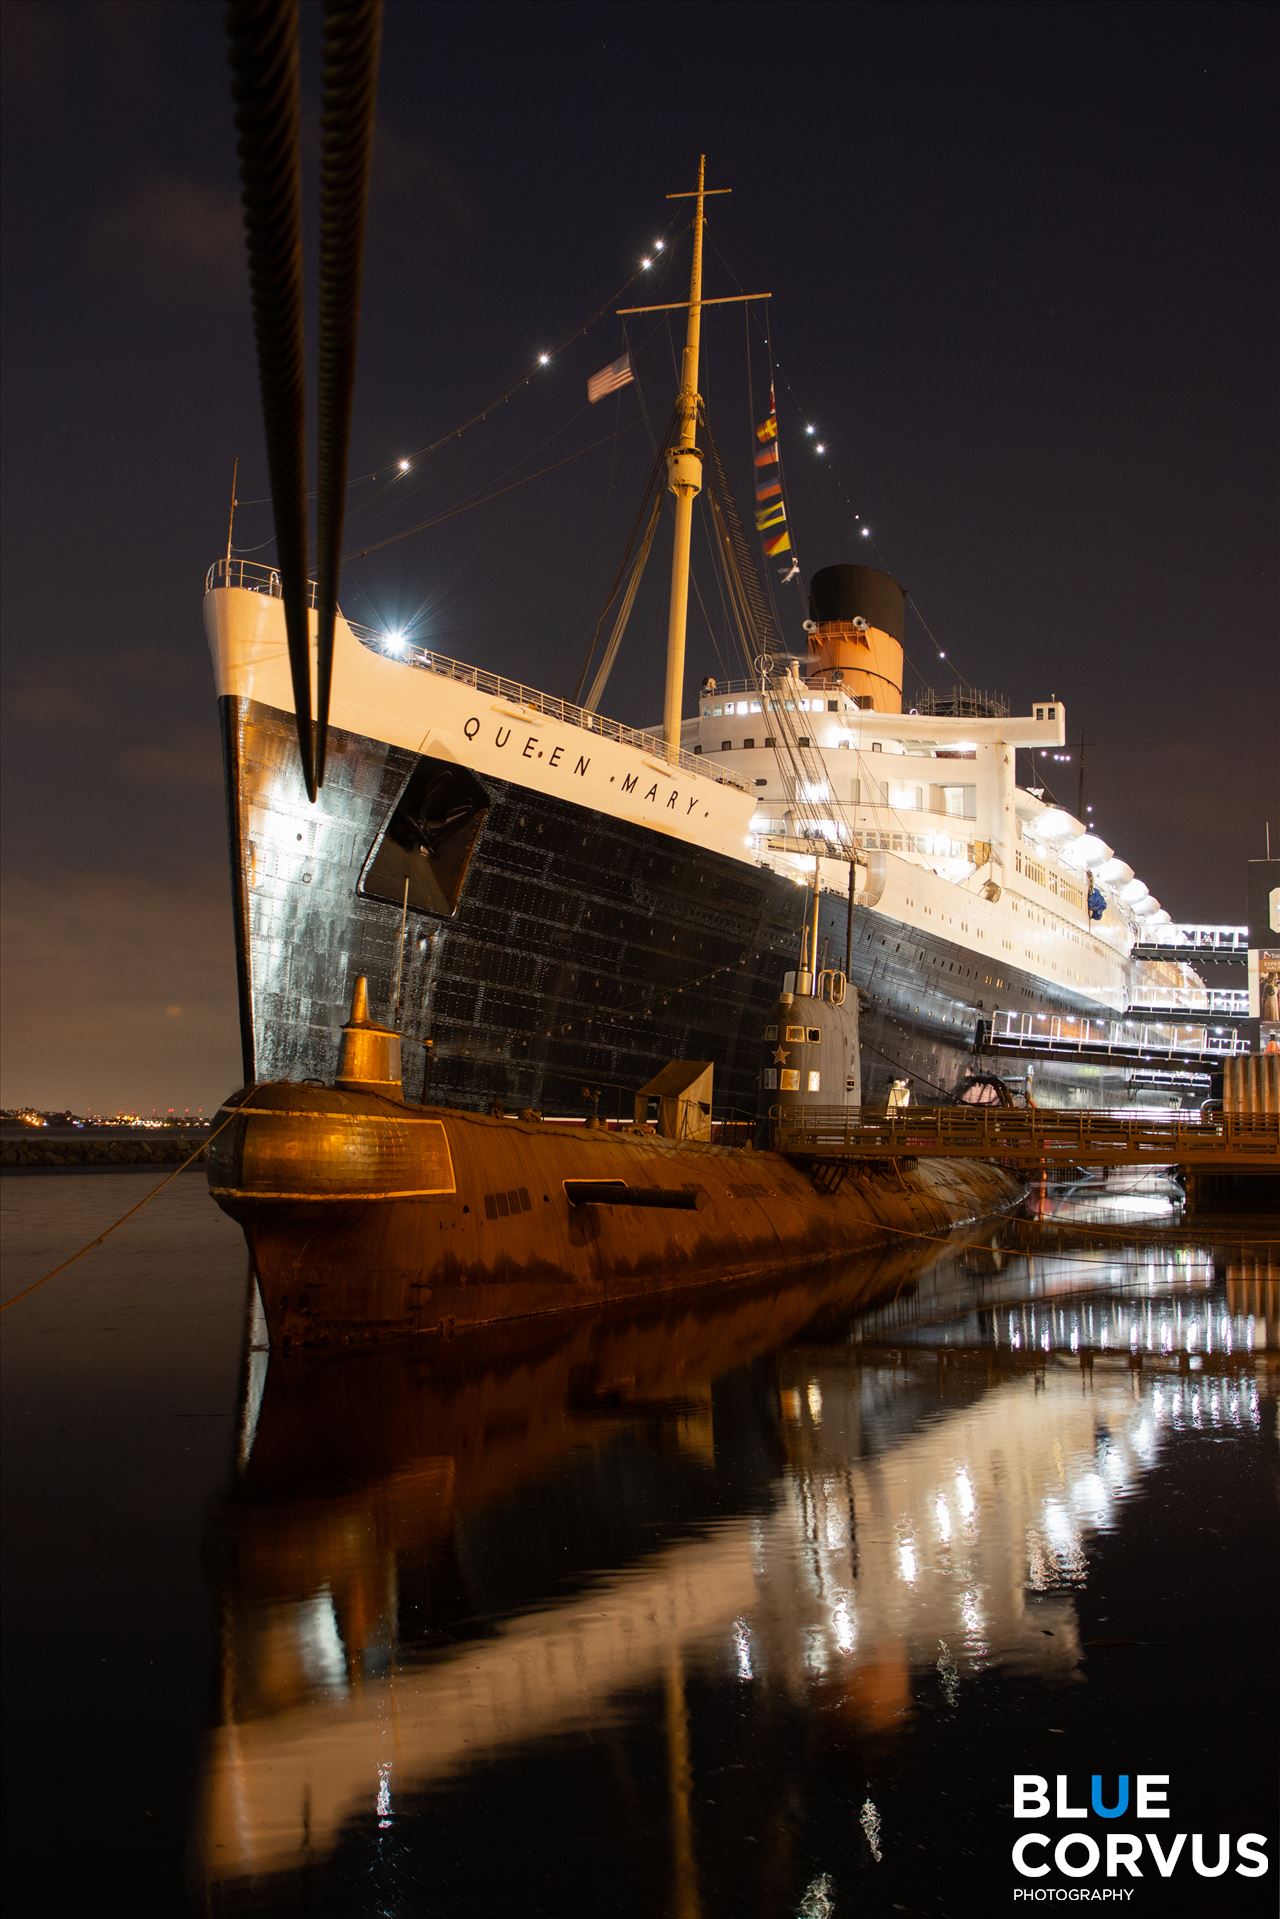 "A Trip Across Time, The Queen Mary"  by Eddie Zamora